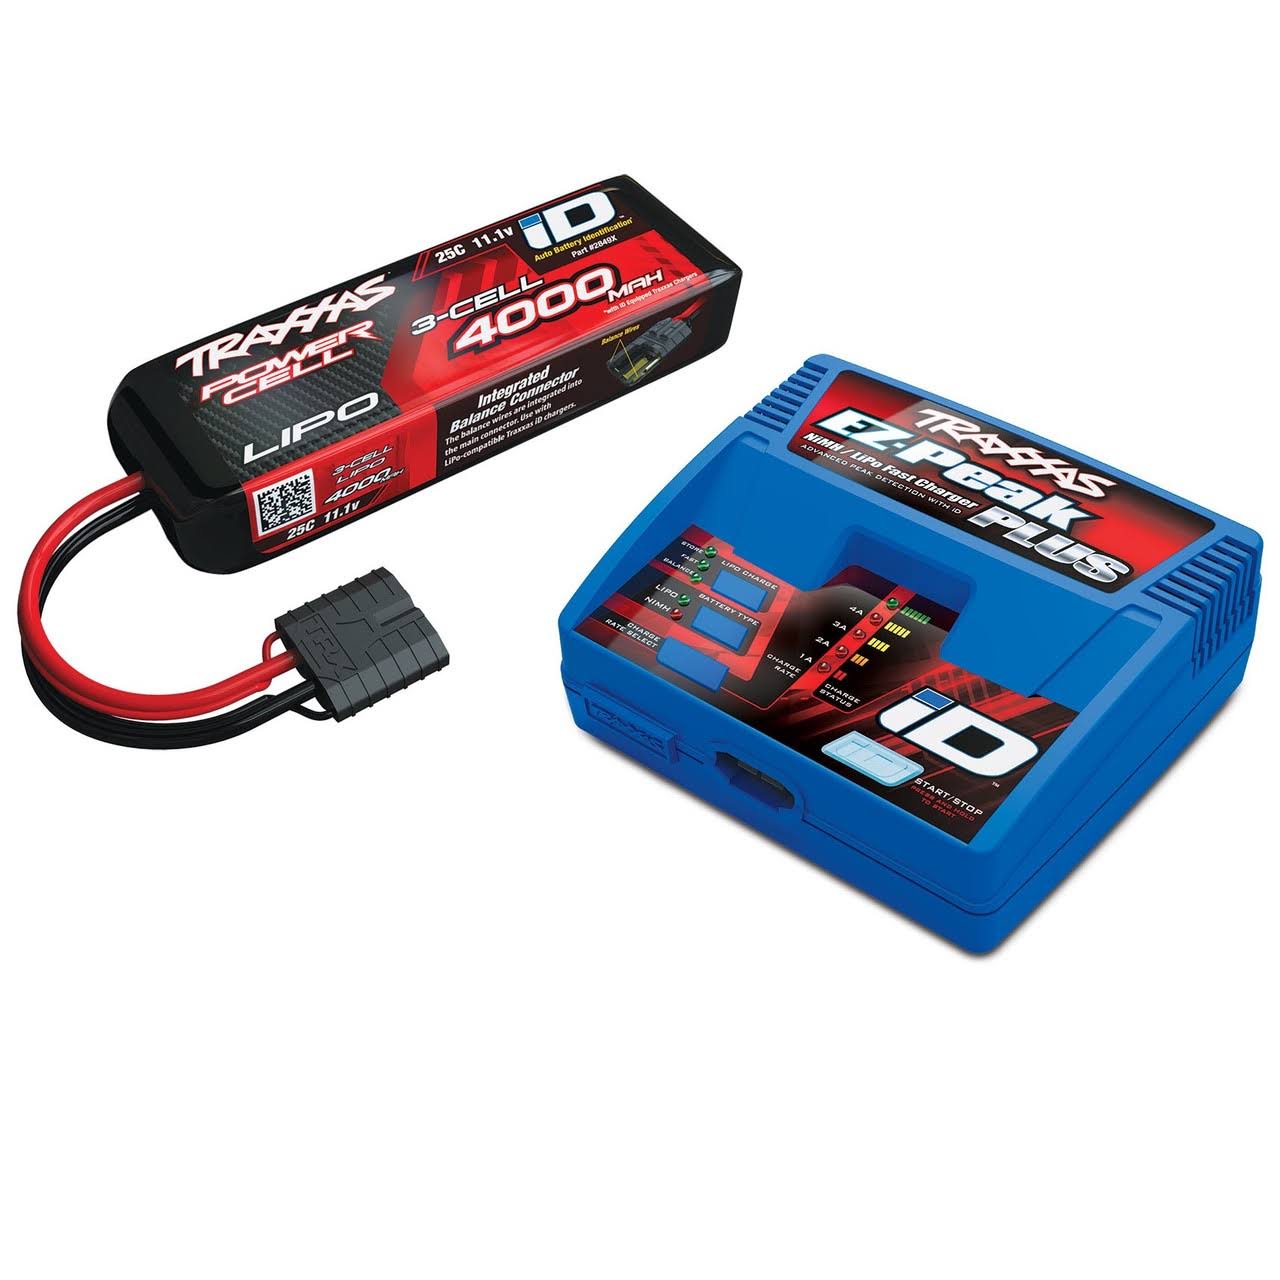 Traxxas EZ-Peak 3S Completer Pack with a 4000mAh LiPo